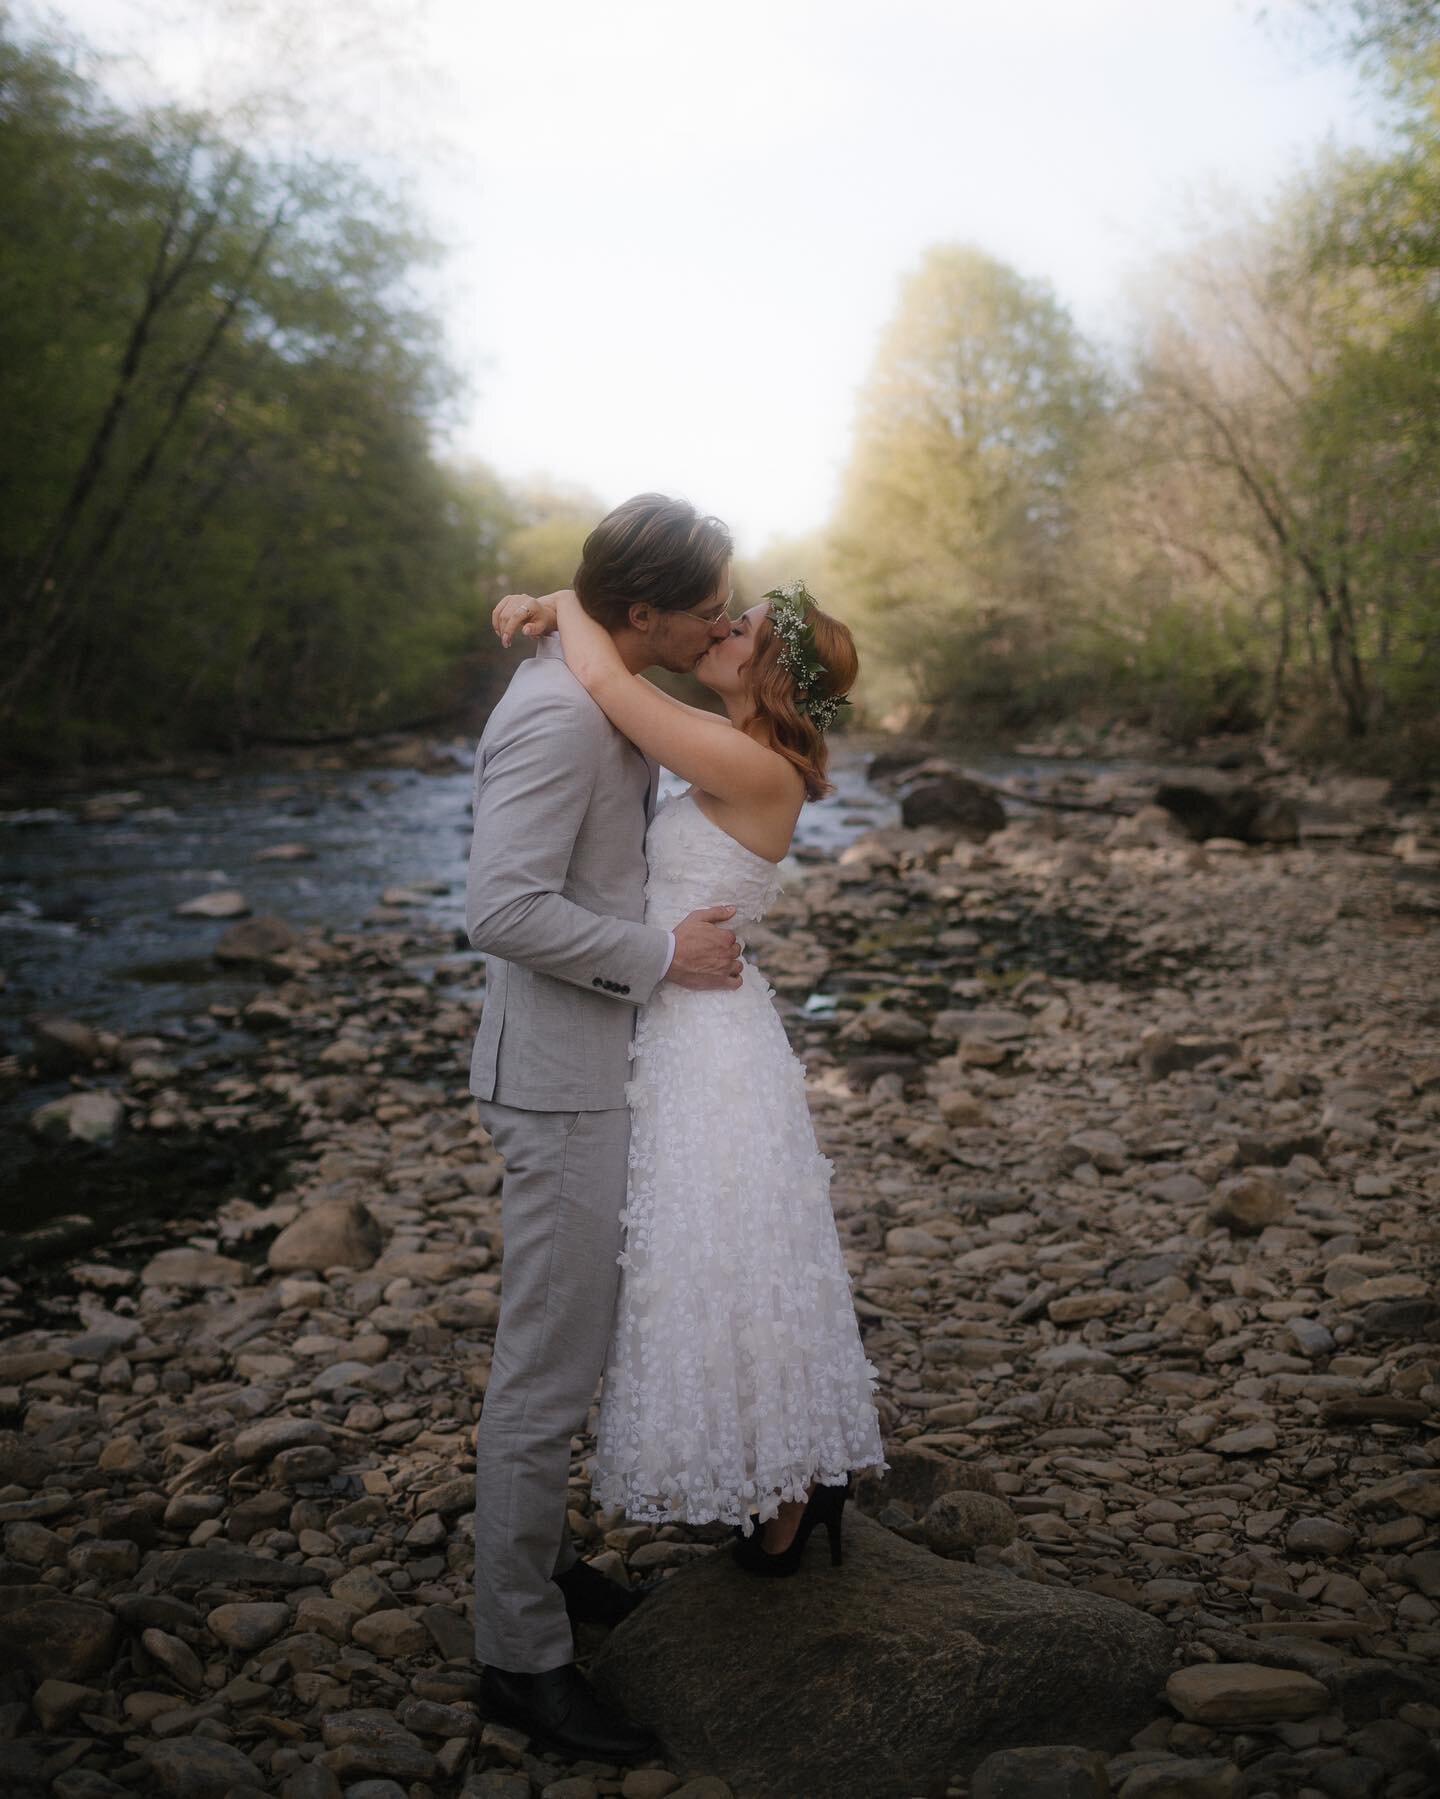 A Spring wedding with a wind of hope. I was blessed to have been a part of Marianne&rsquo;s and Daniel&rsquo;s new season. It was an emotional and intimate wedding. I cried at least six times, starting with Marianne&rsquo;s first look with her brothe